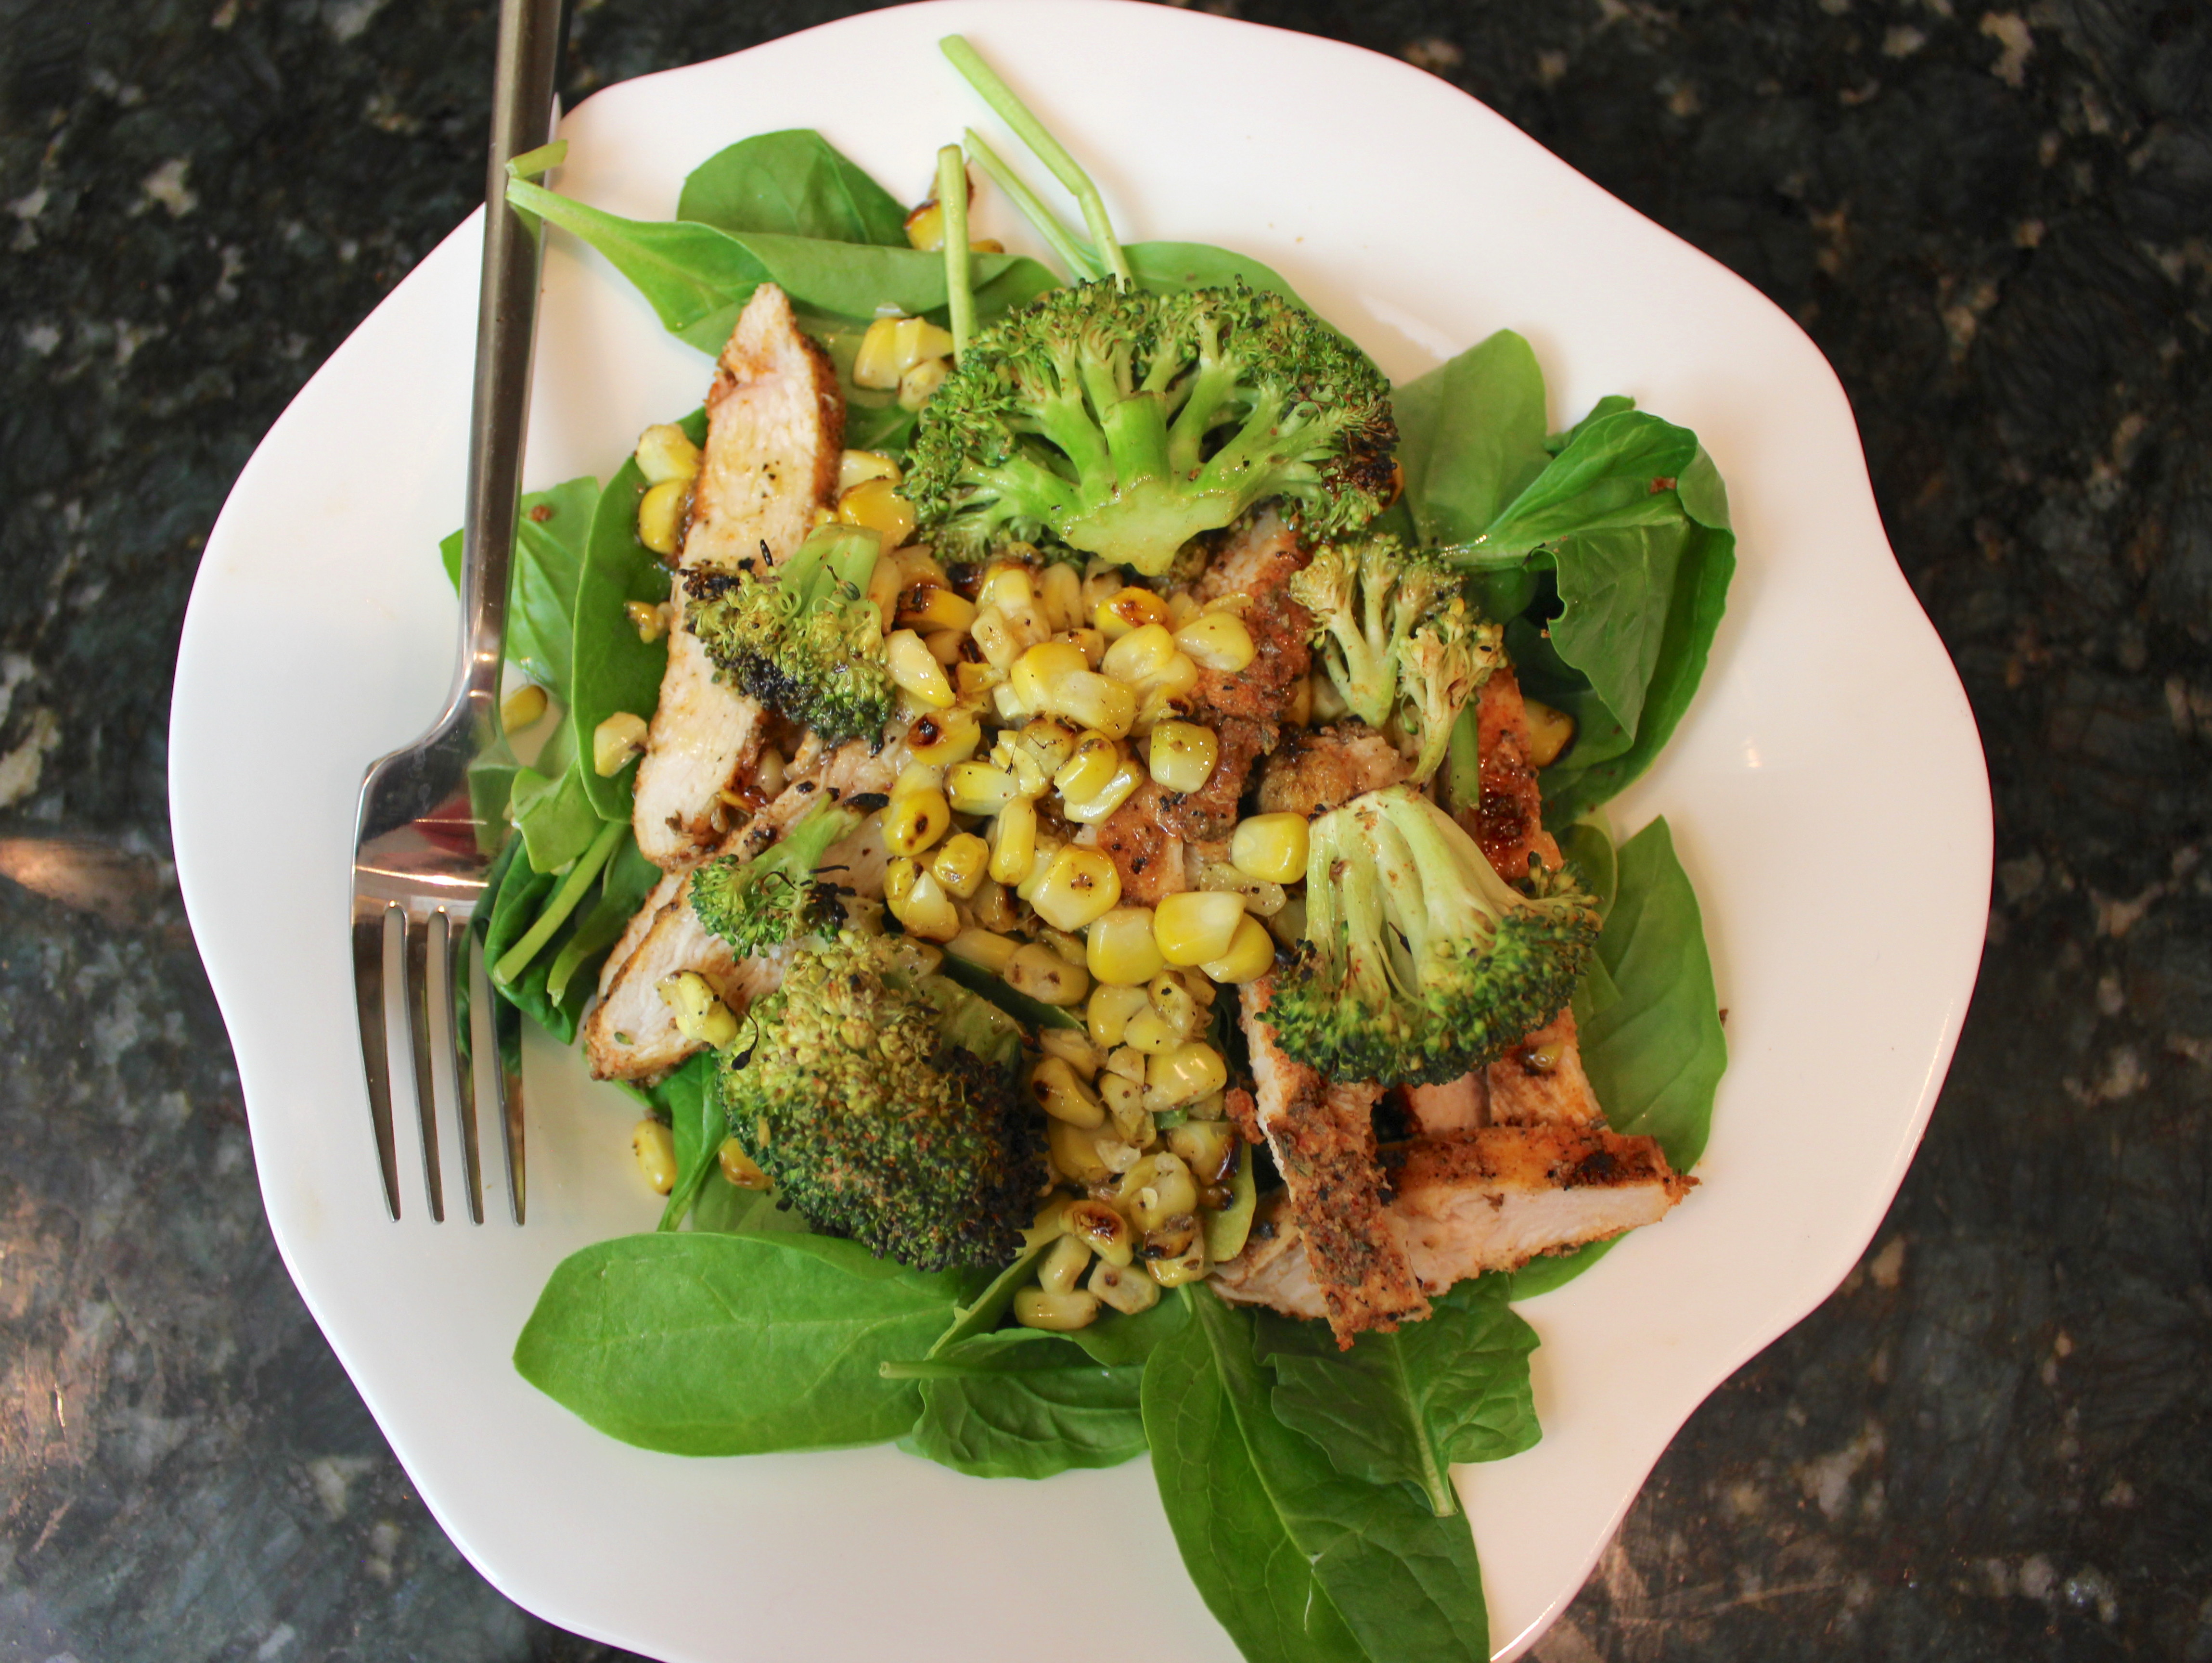 Spinach and Grilled Chicken Salad Recipe